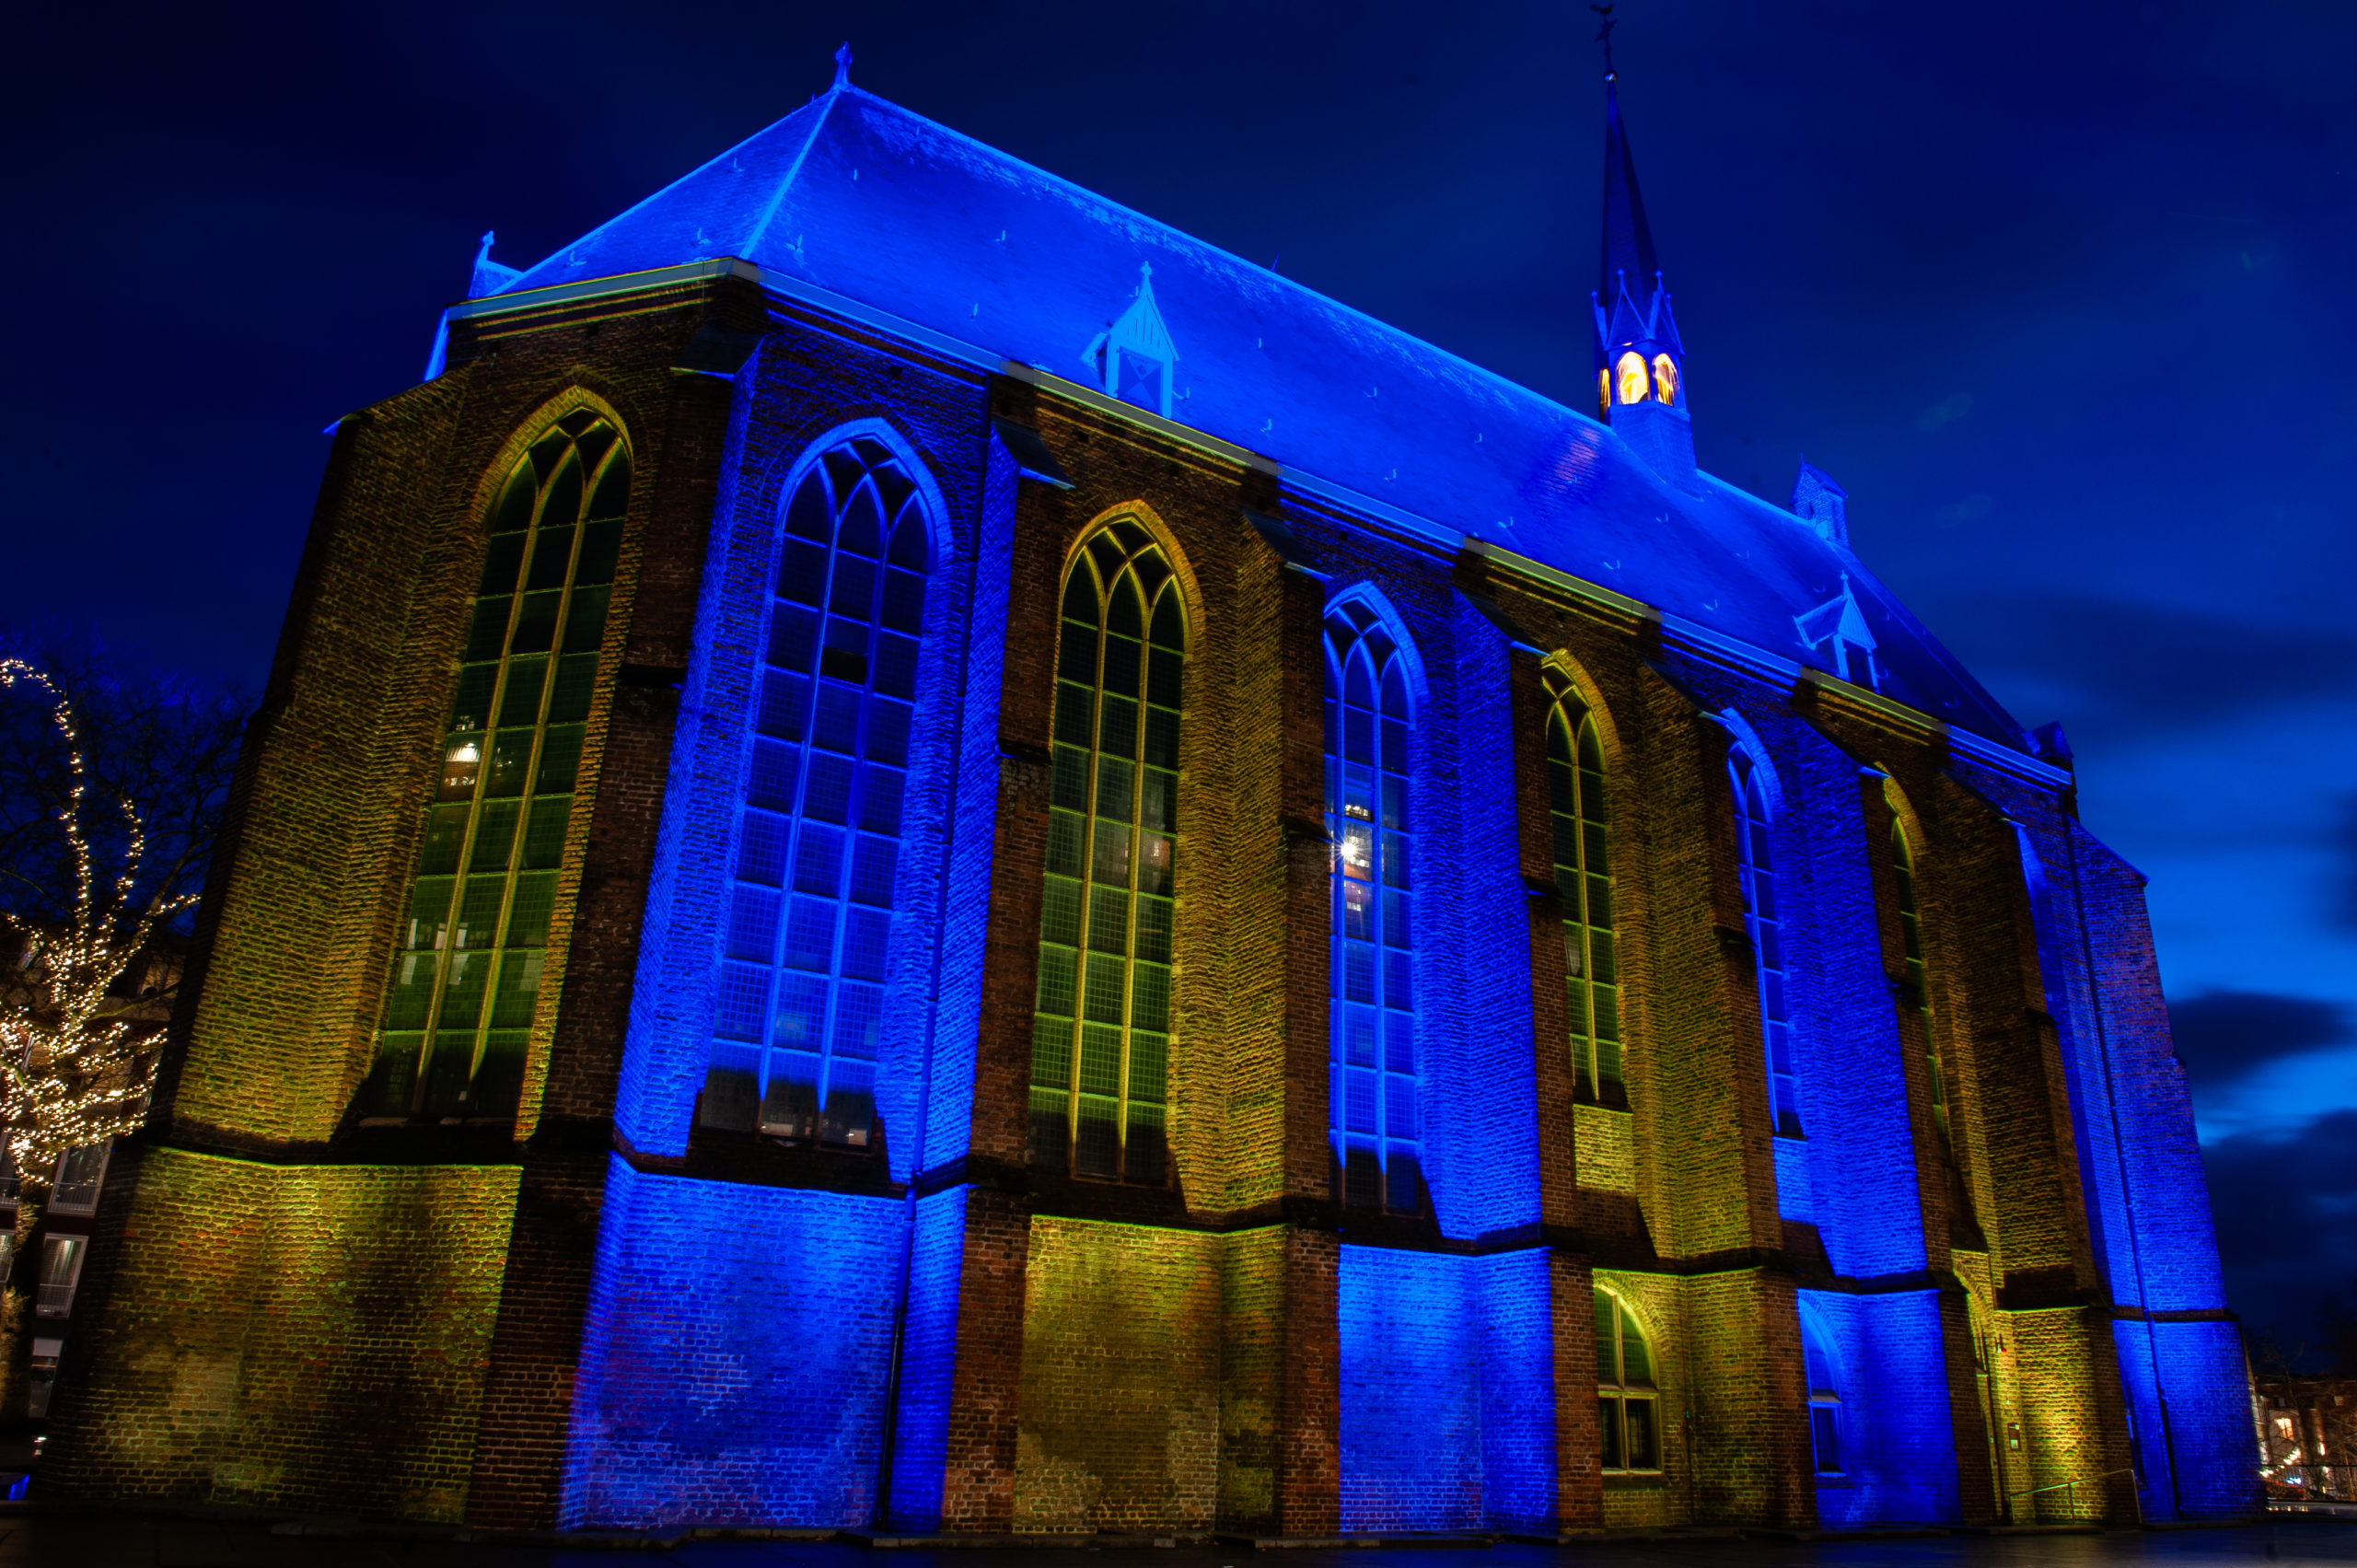 Buildings In The Netherlands Have Been Illuminated With The Colors Of The Ukrainian Flag